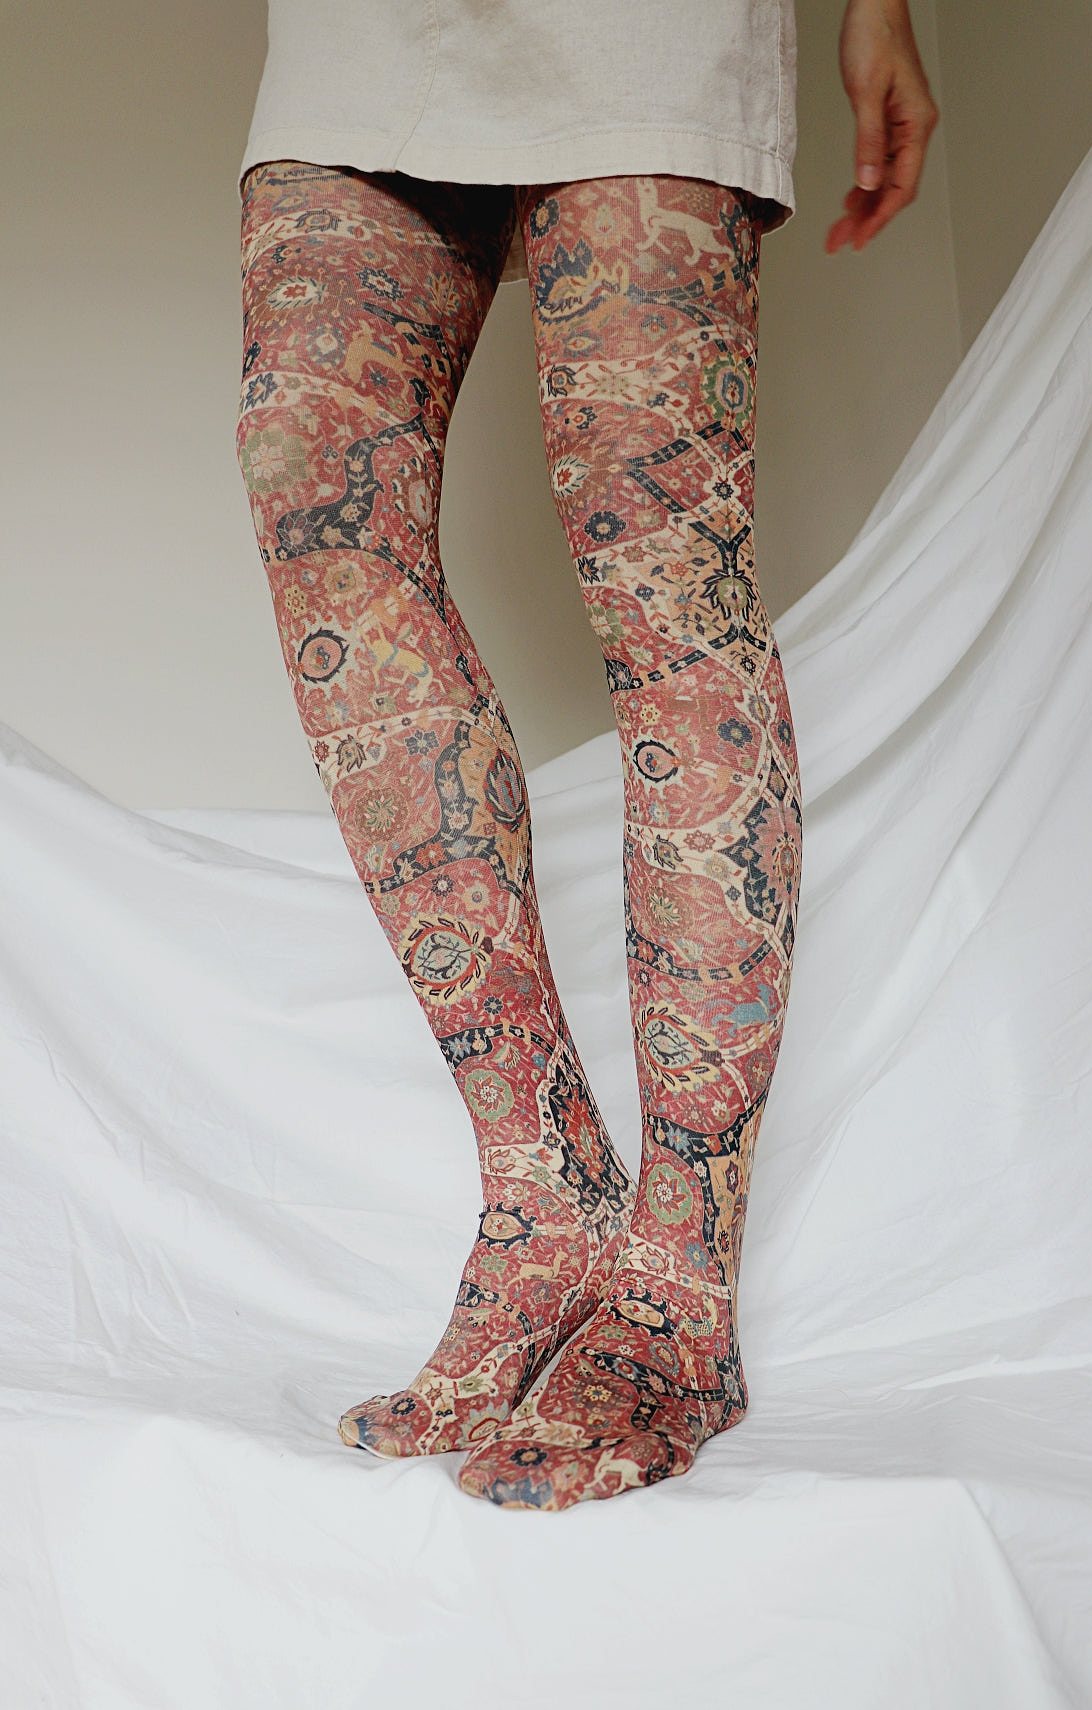 Women's Patterned Tights